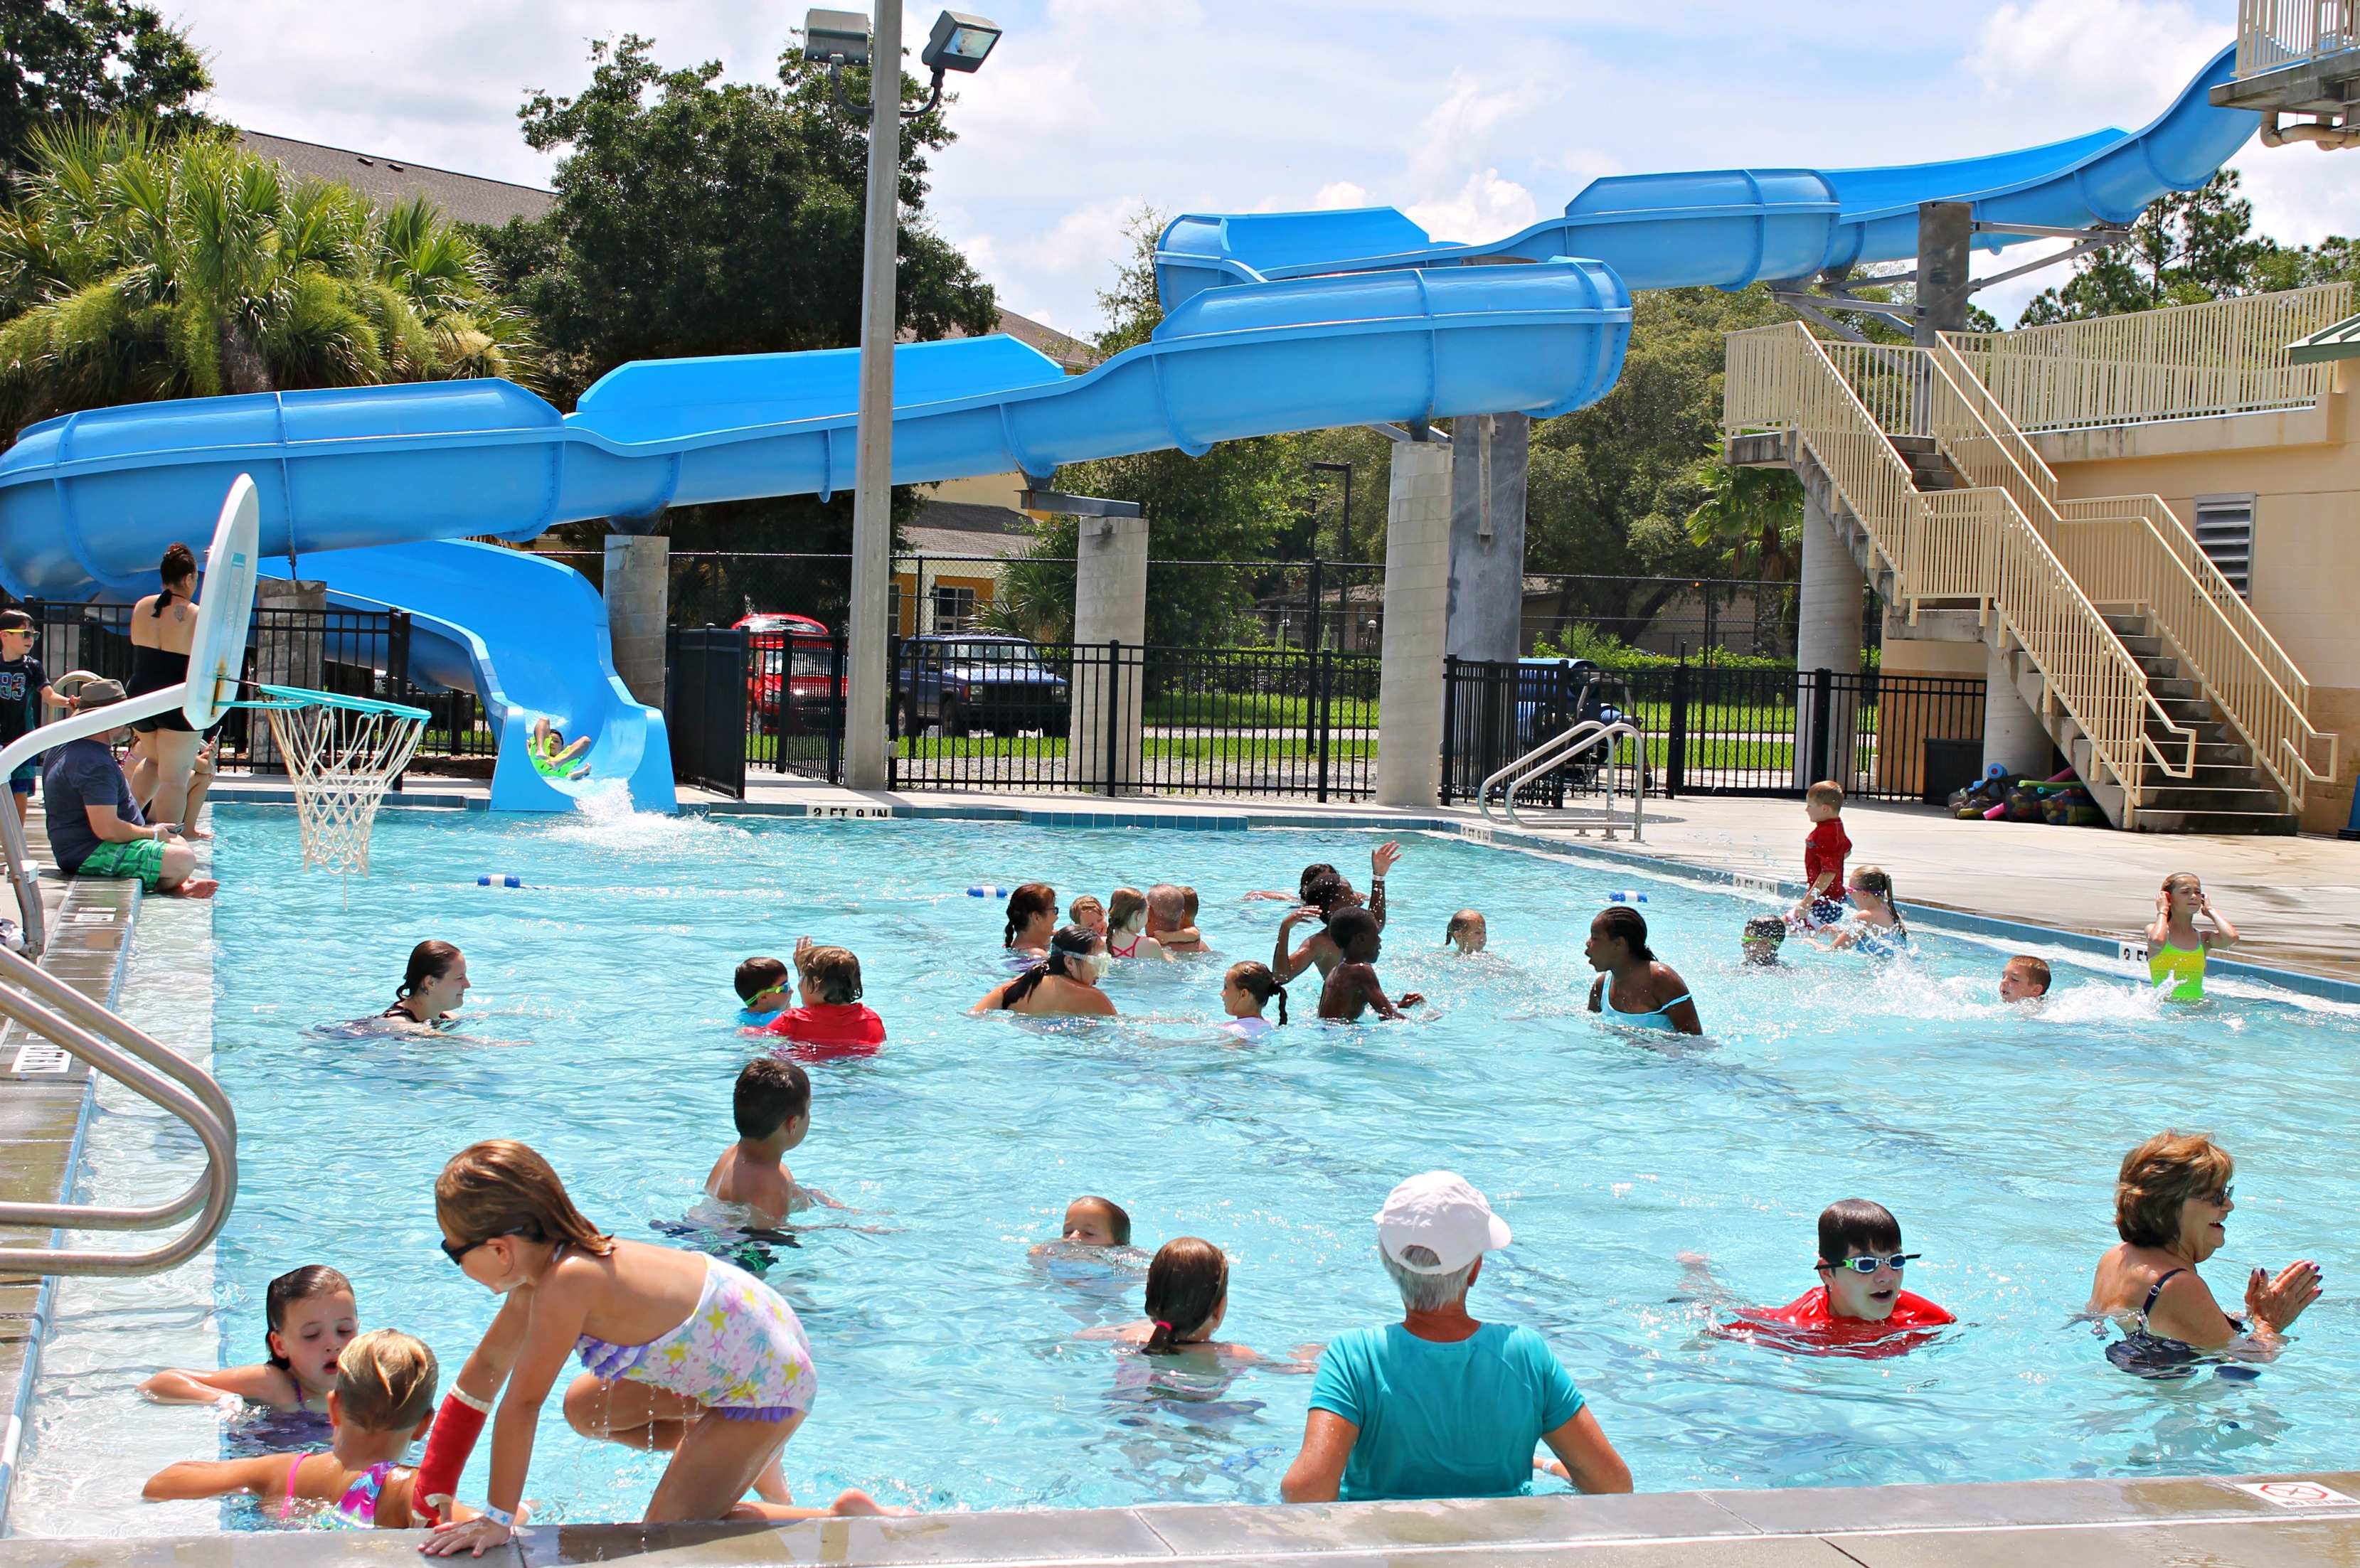 Swimming pool with a large waterslide leading into it. There are several active people in the pool.